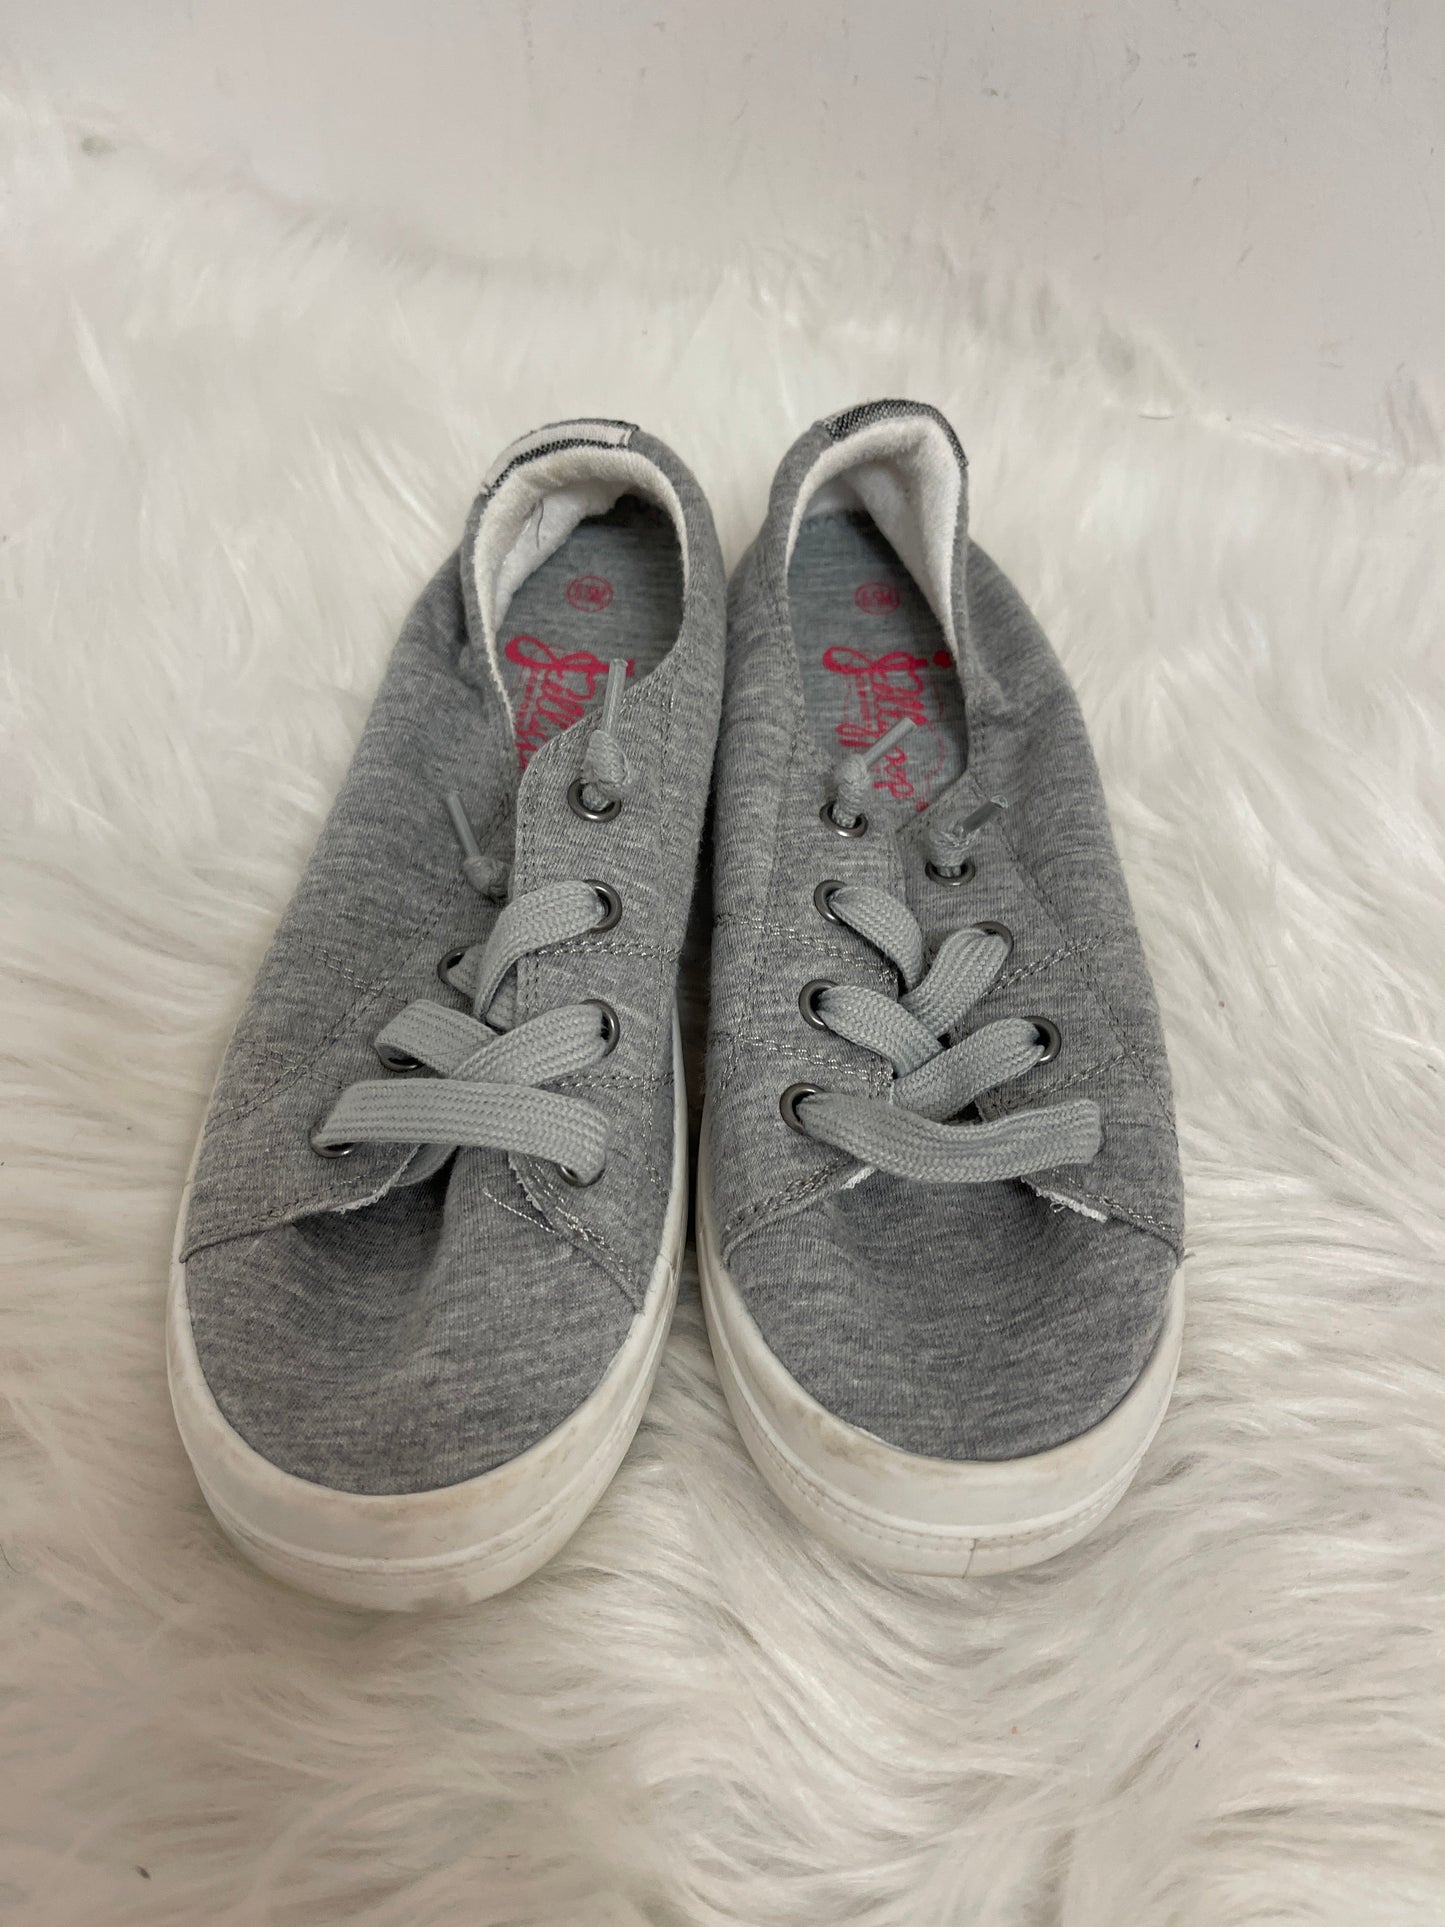 Grey Shoes Sneakers Jelly Pop, Size 6.5